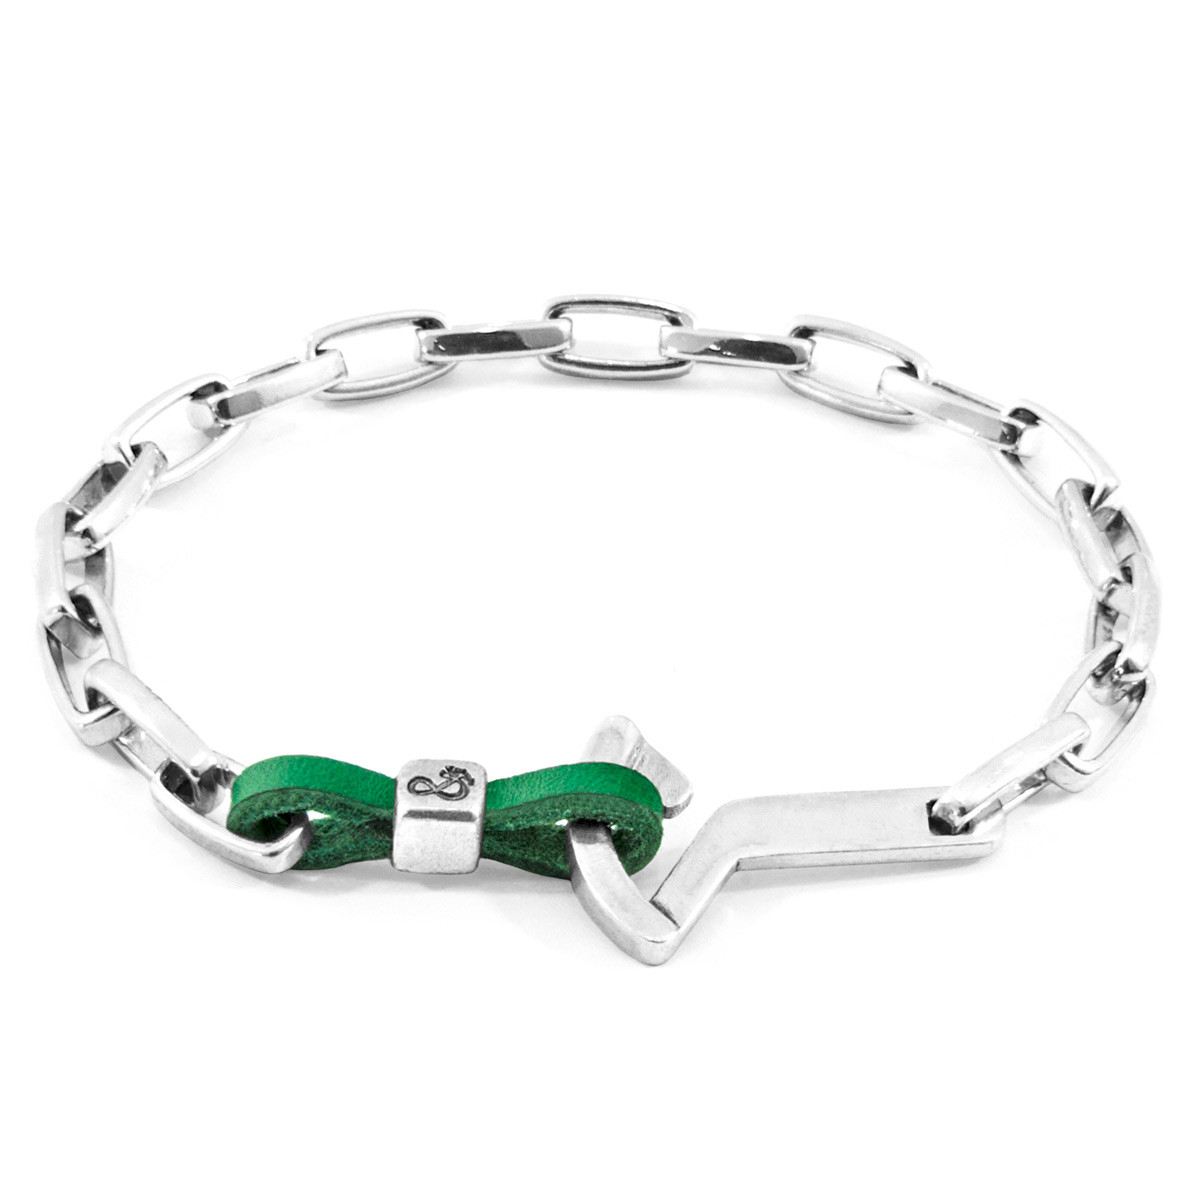 Anchor & Crew Fern Green Frigate Silver and Flat Leather Bracelet